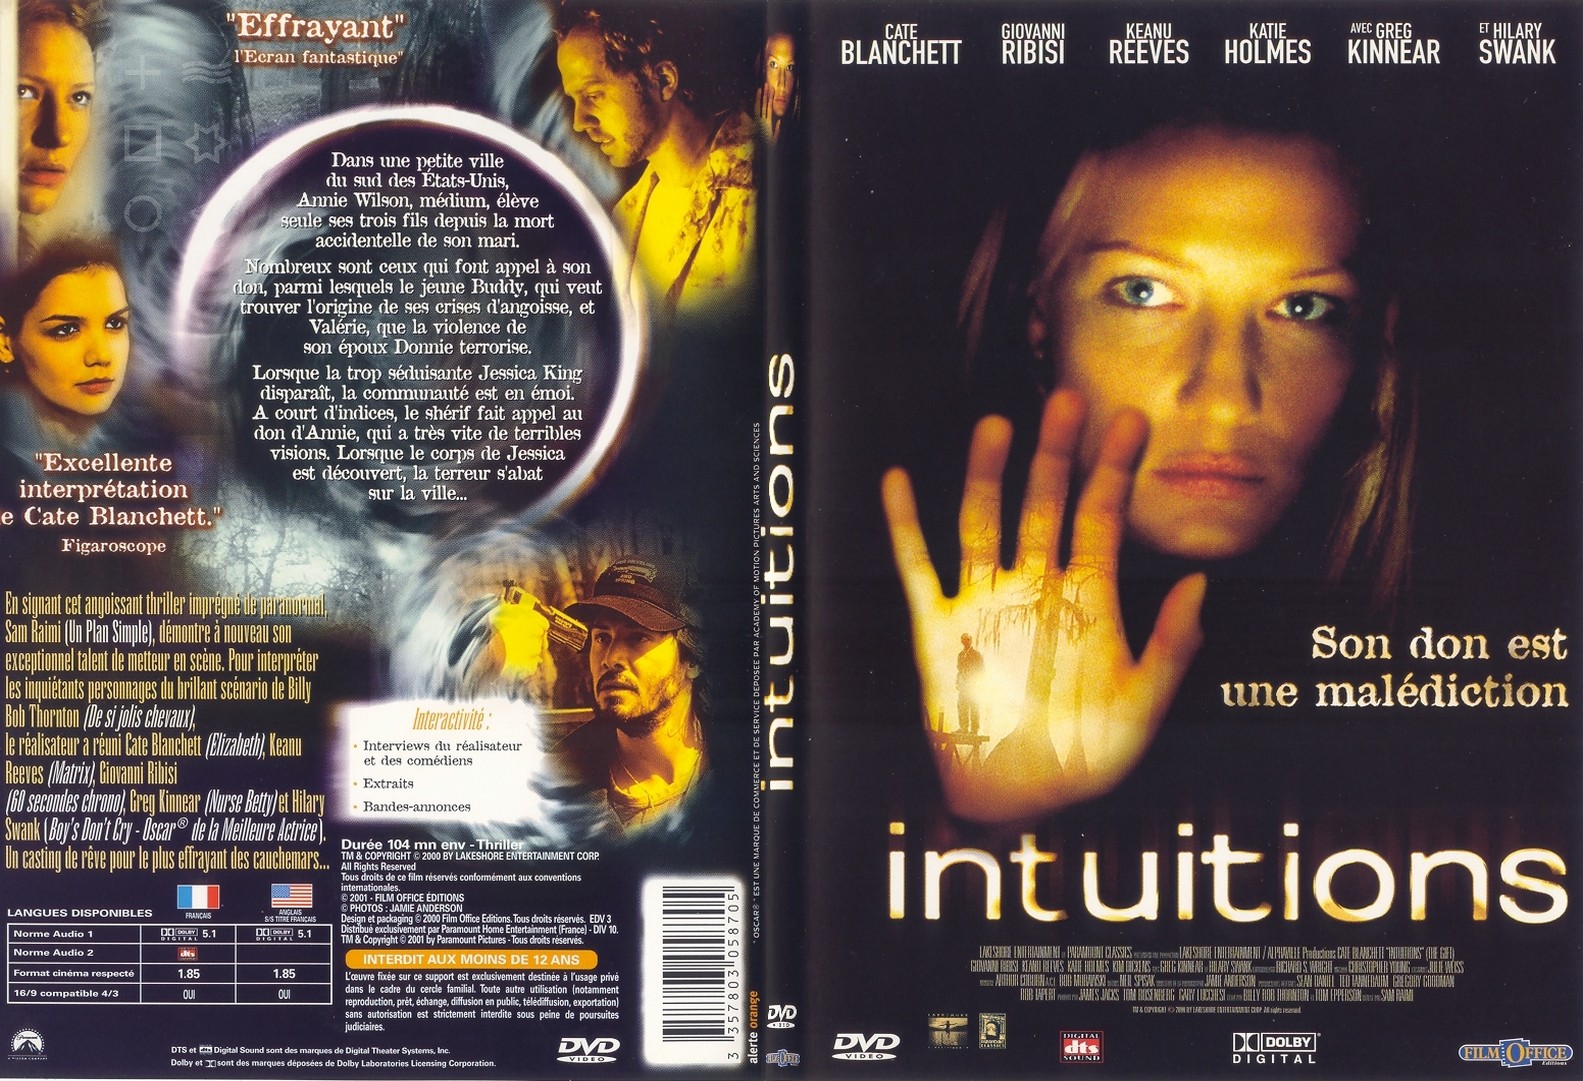 Jaquette DVD Intuitions - SLIM